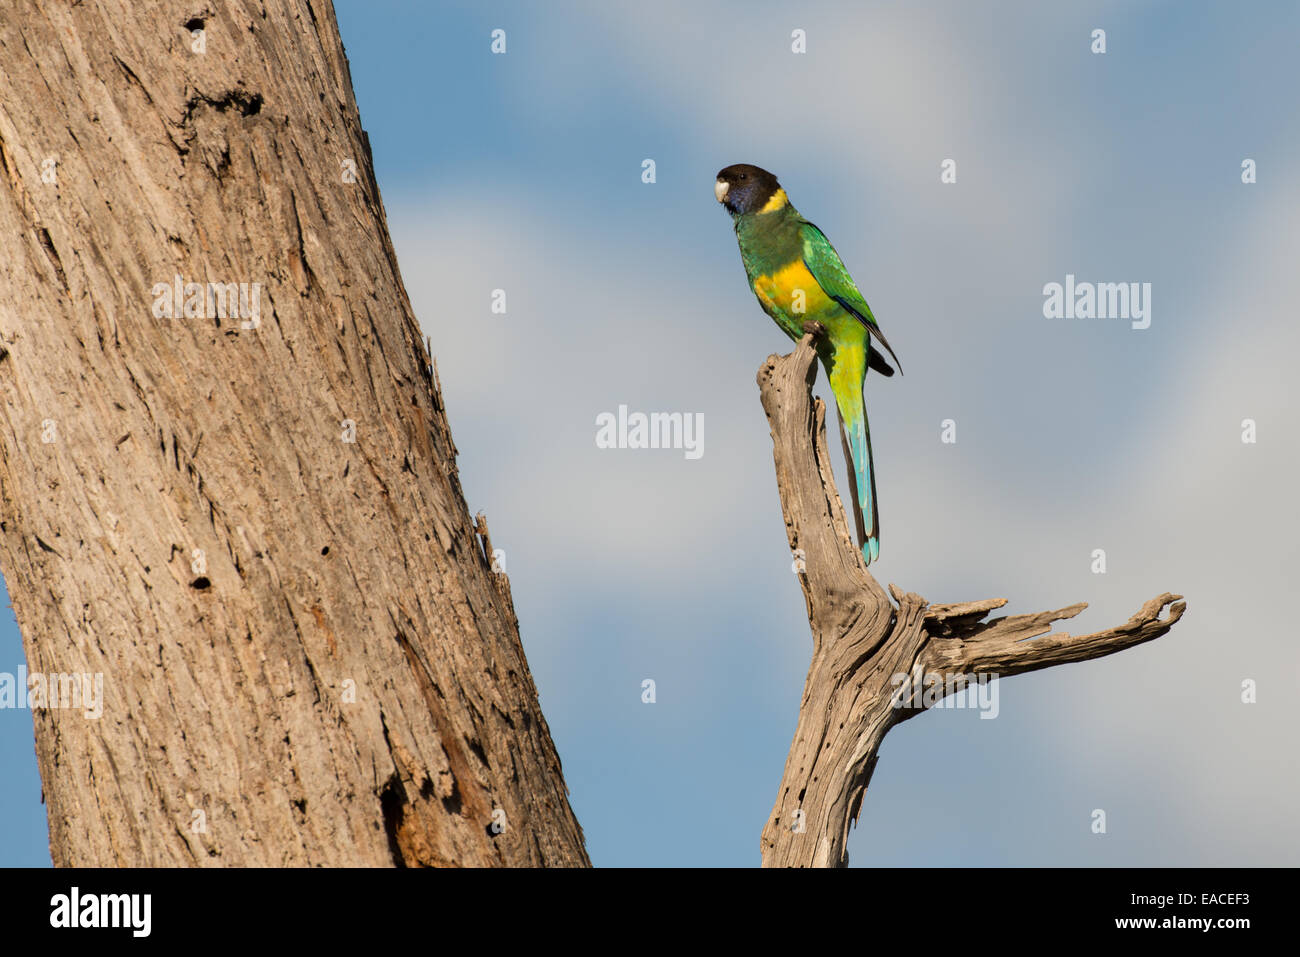 Stock photo of an Australian ringneck parrot perched on a branch. Stock Photo